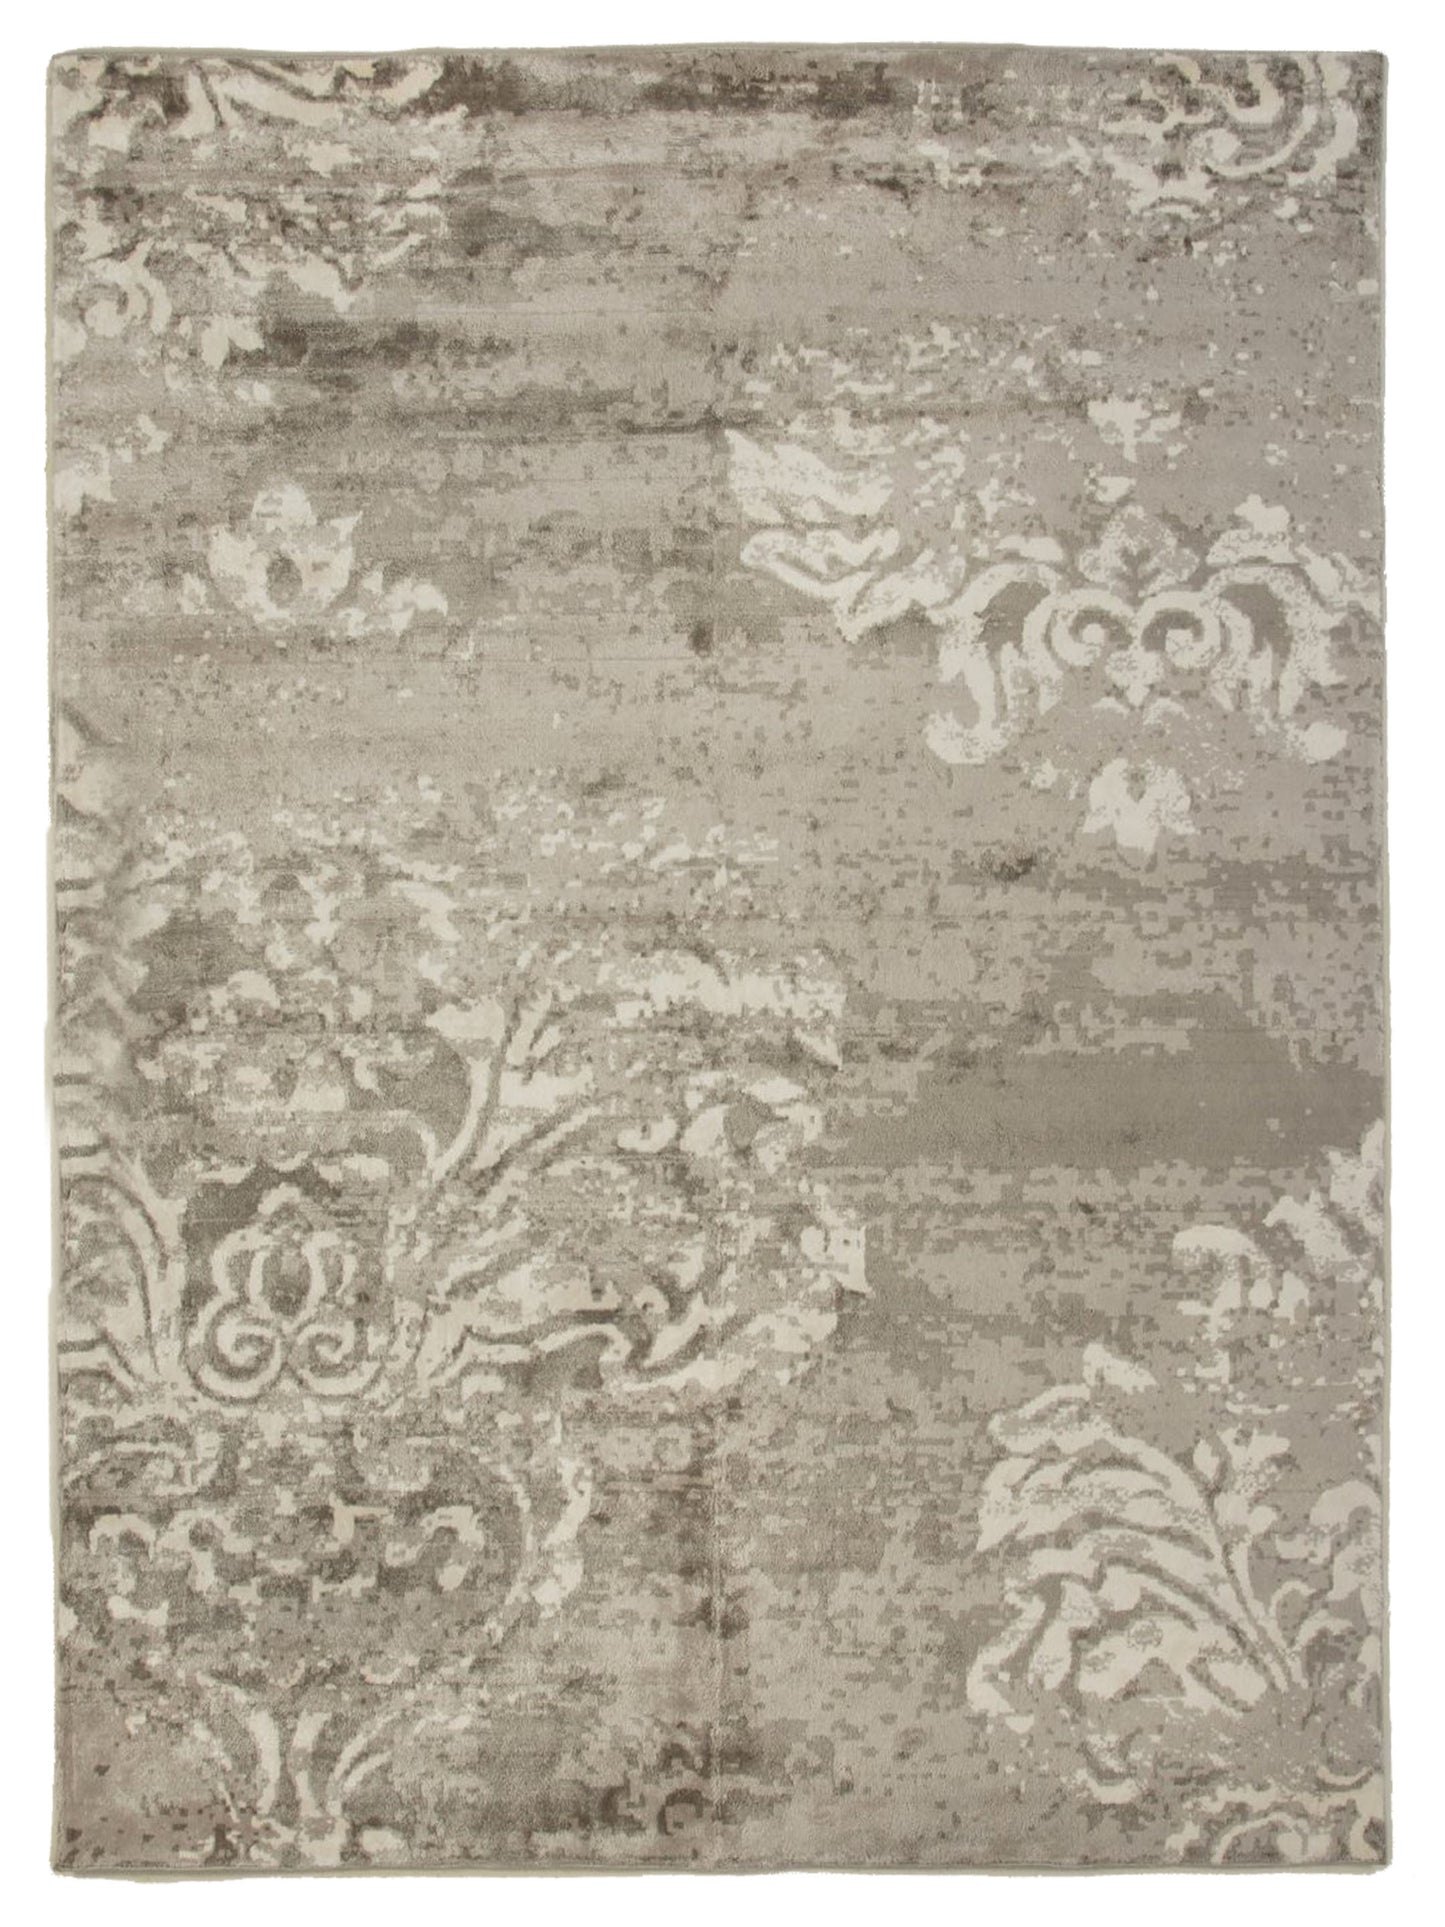 Artisan Lucy Lux-3 Lt.Grey Transitional Machinemade Rug